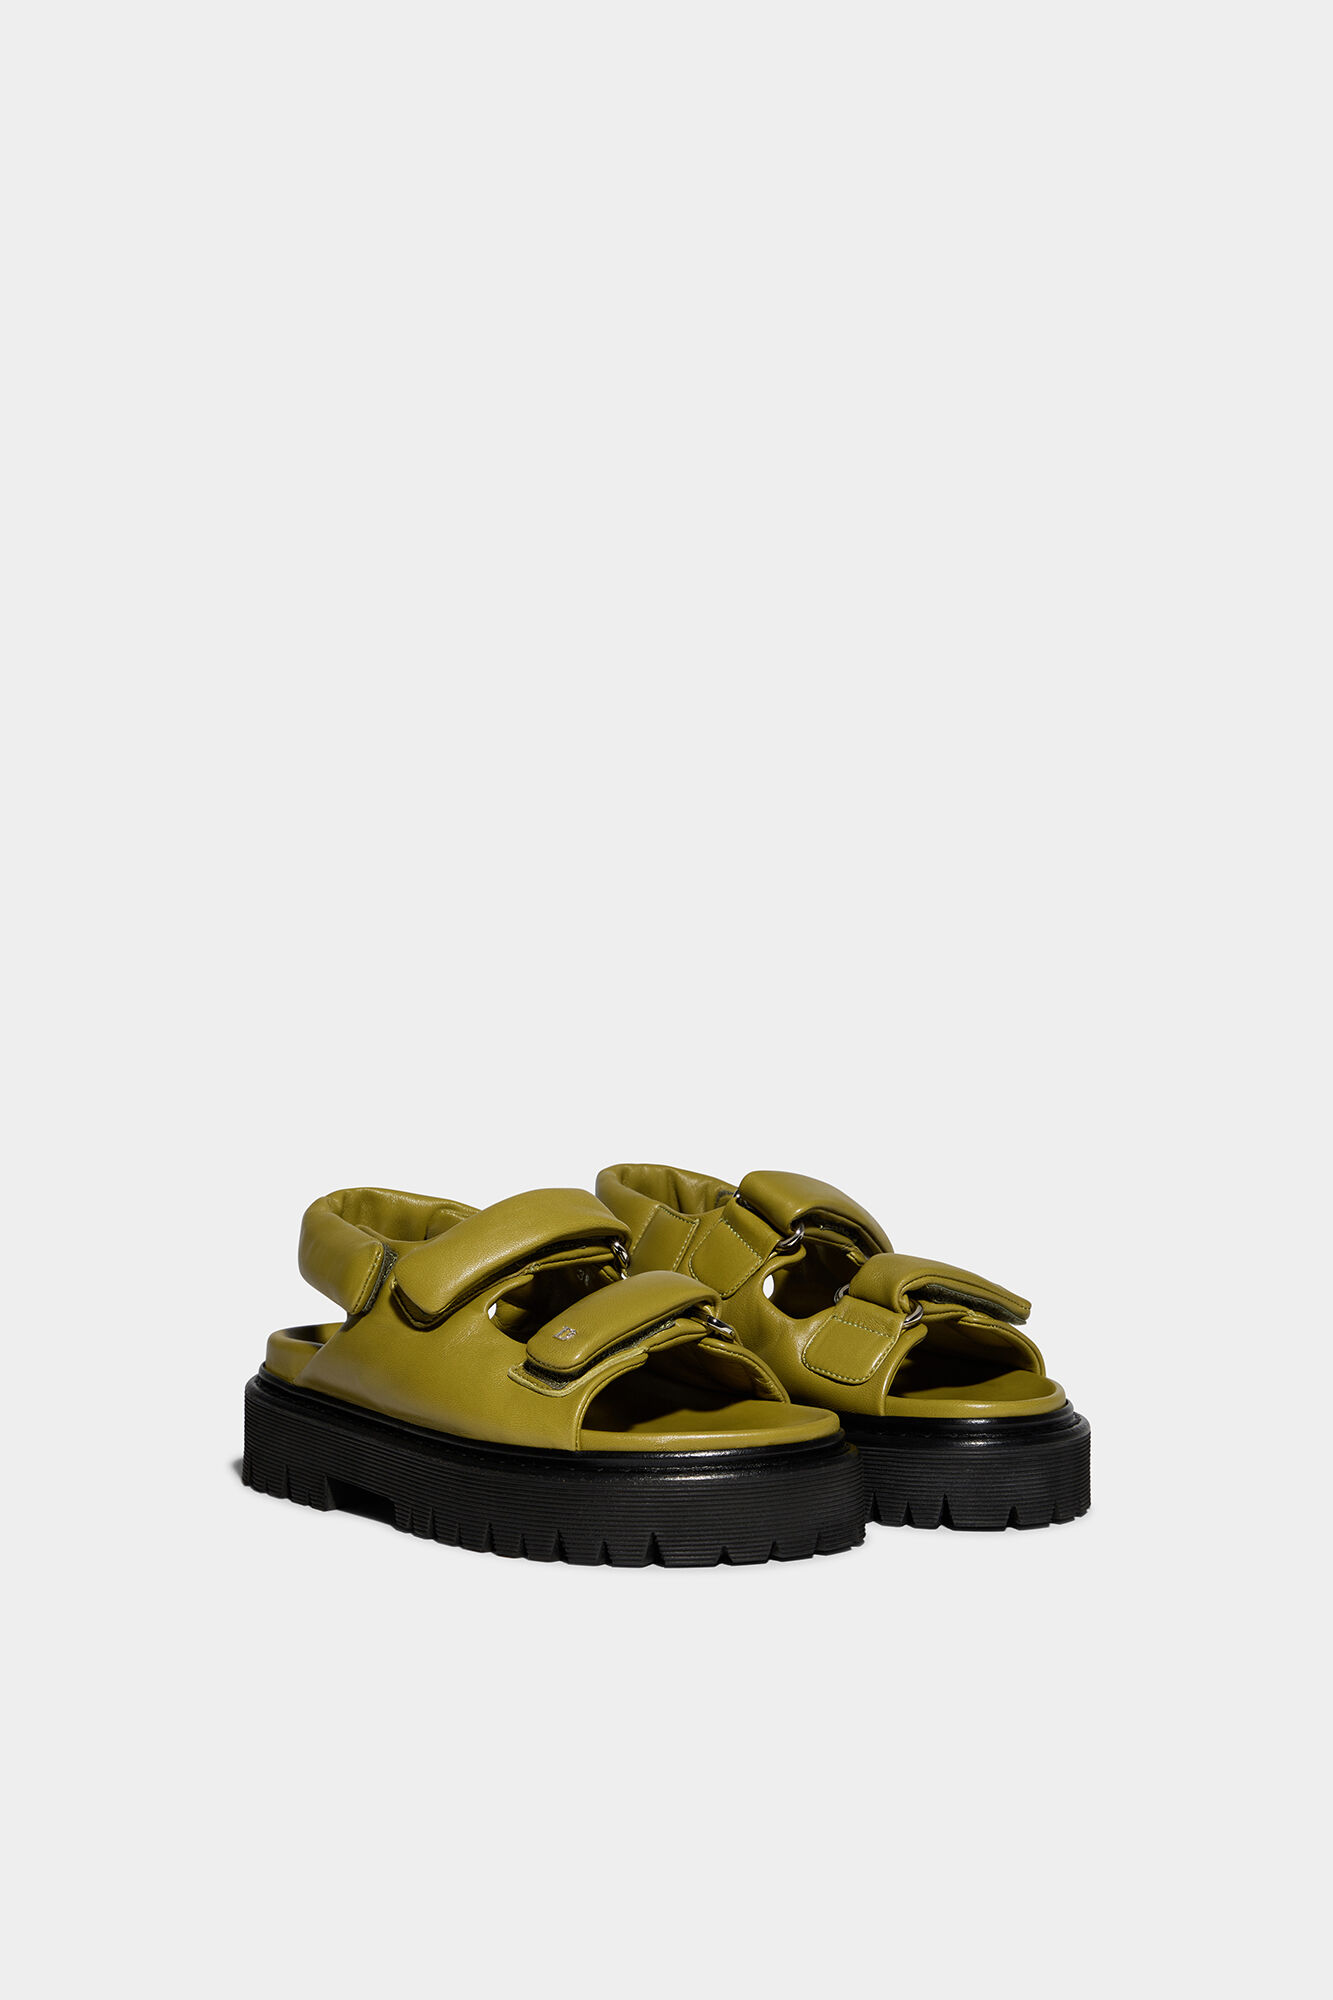 PaddeD2 Sandals